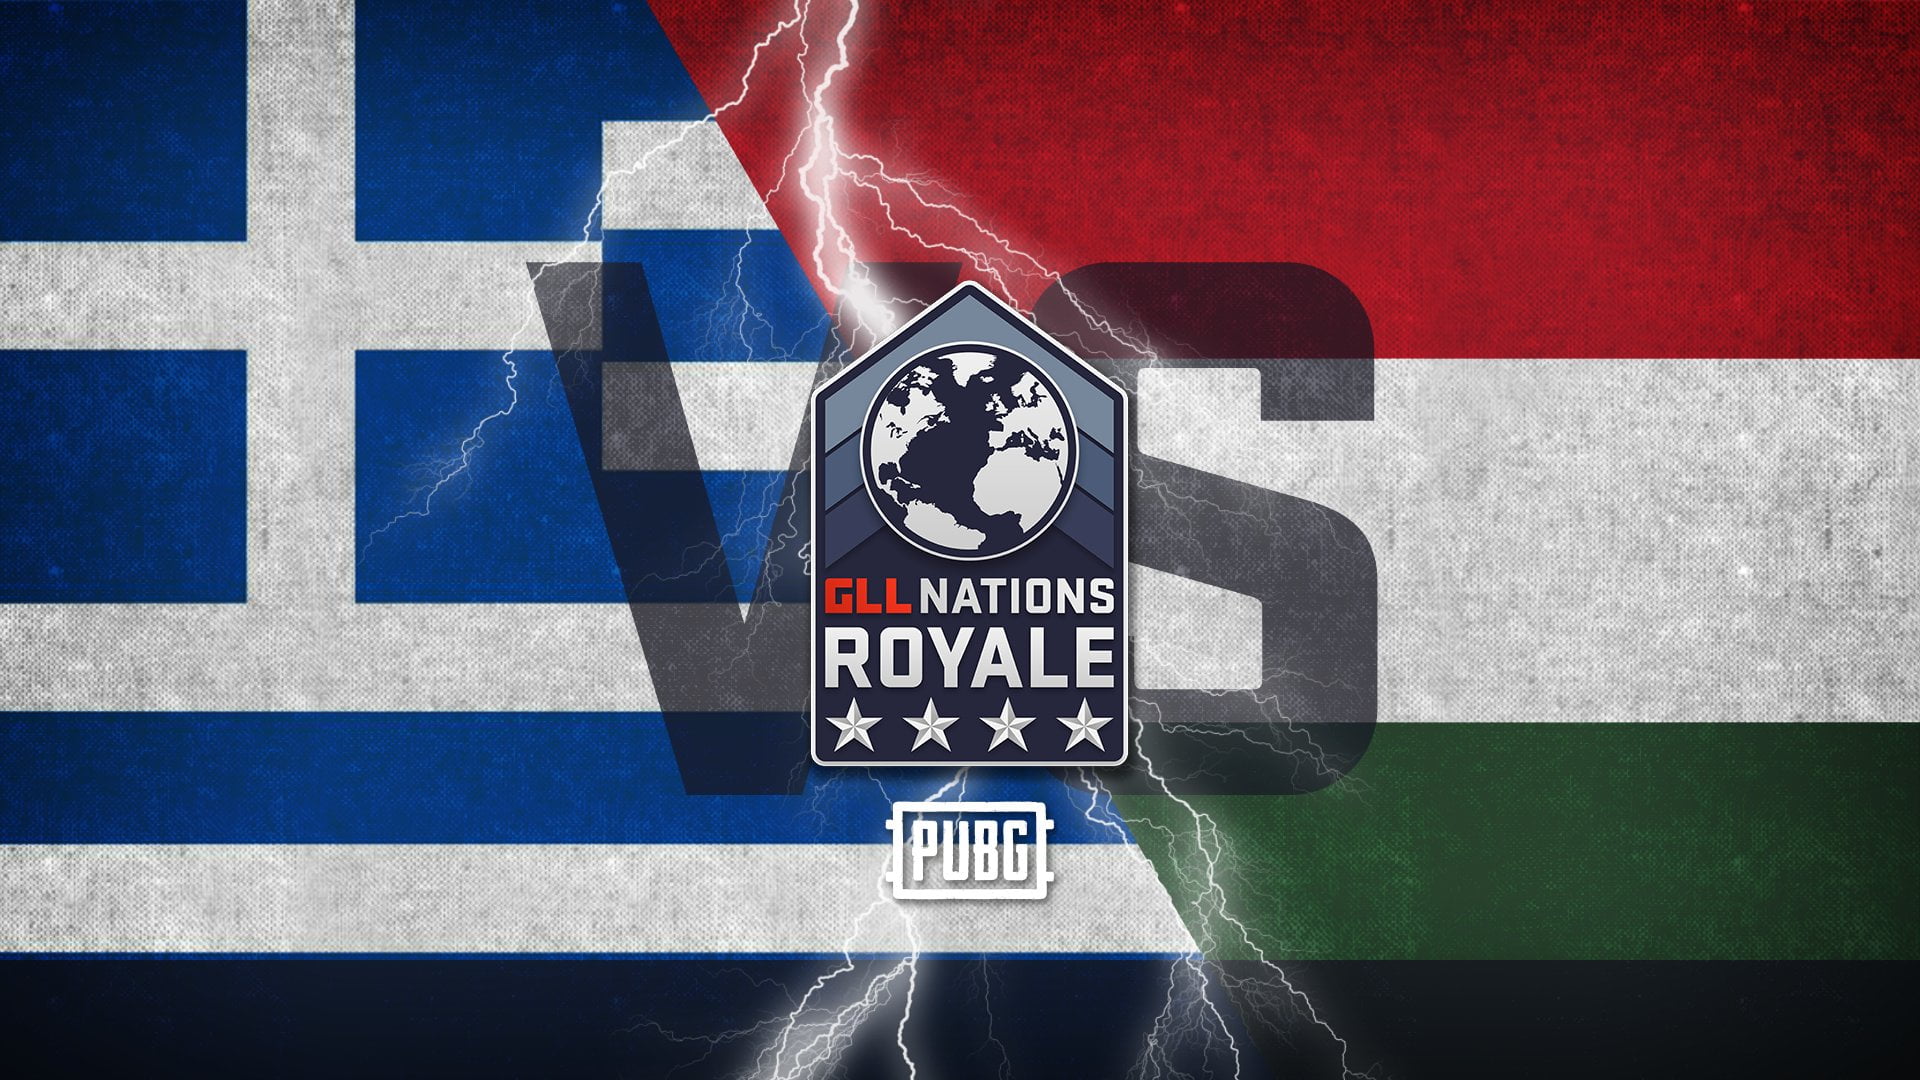 gll nations royale esportimes